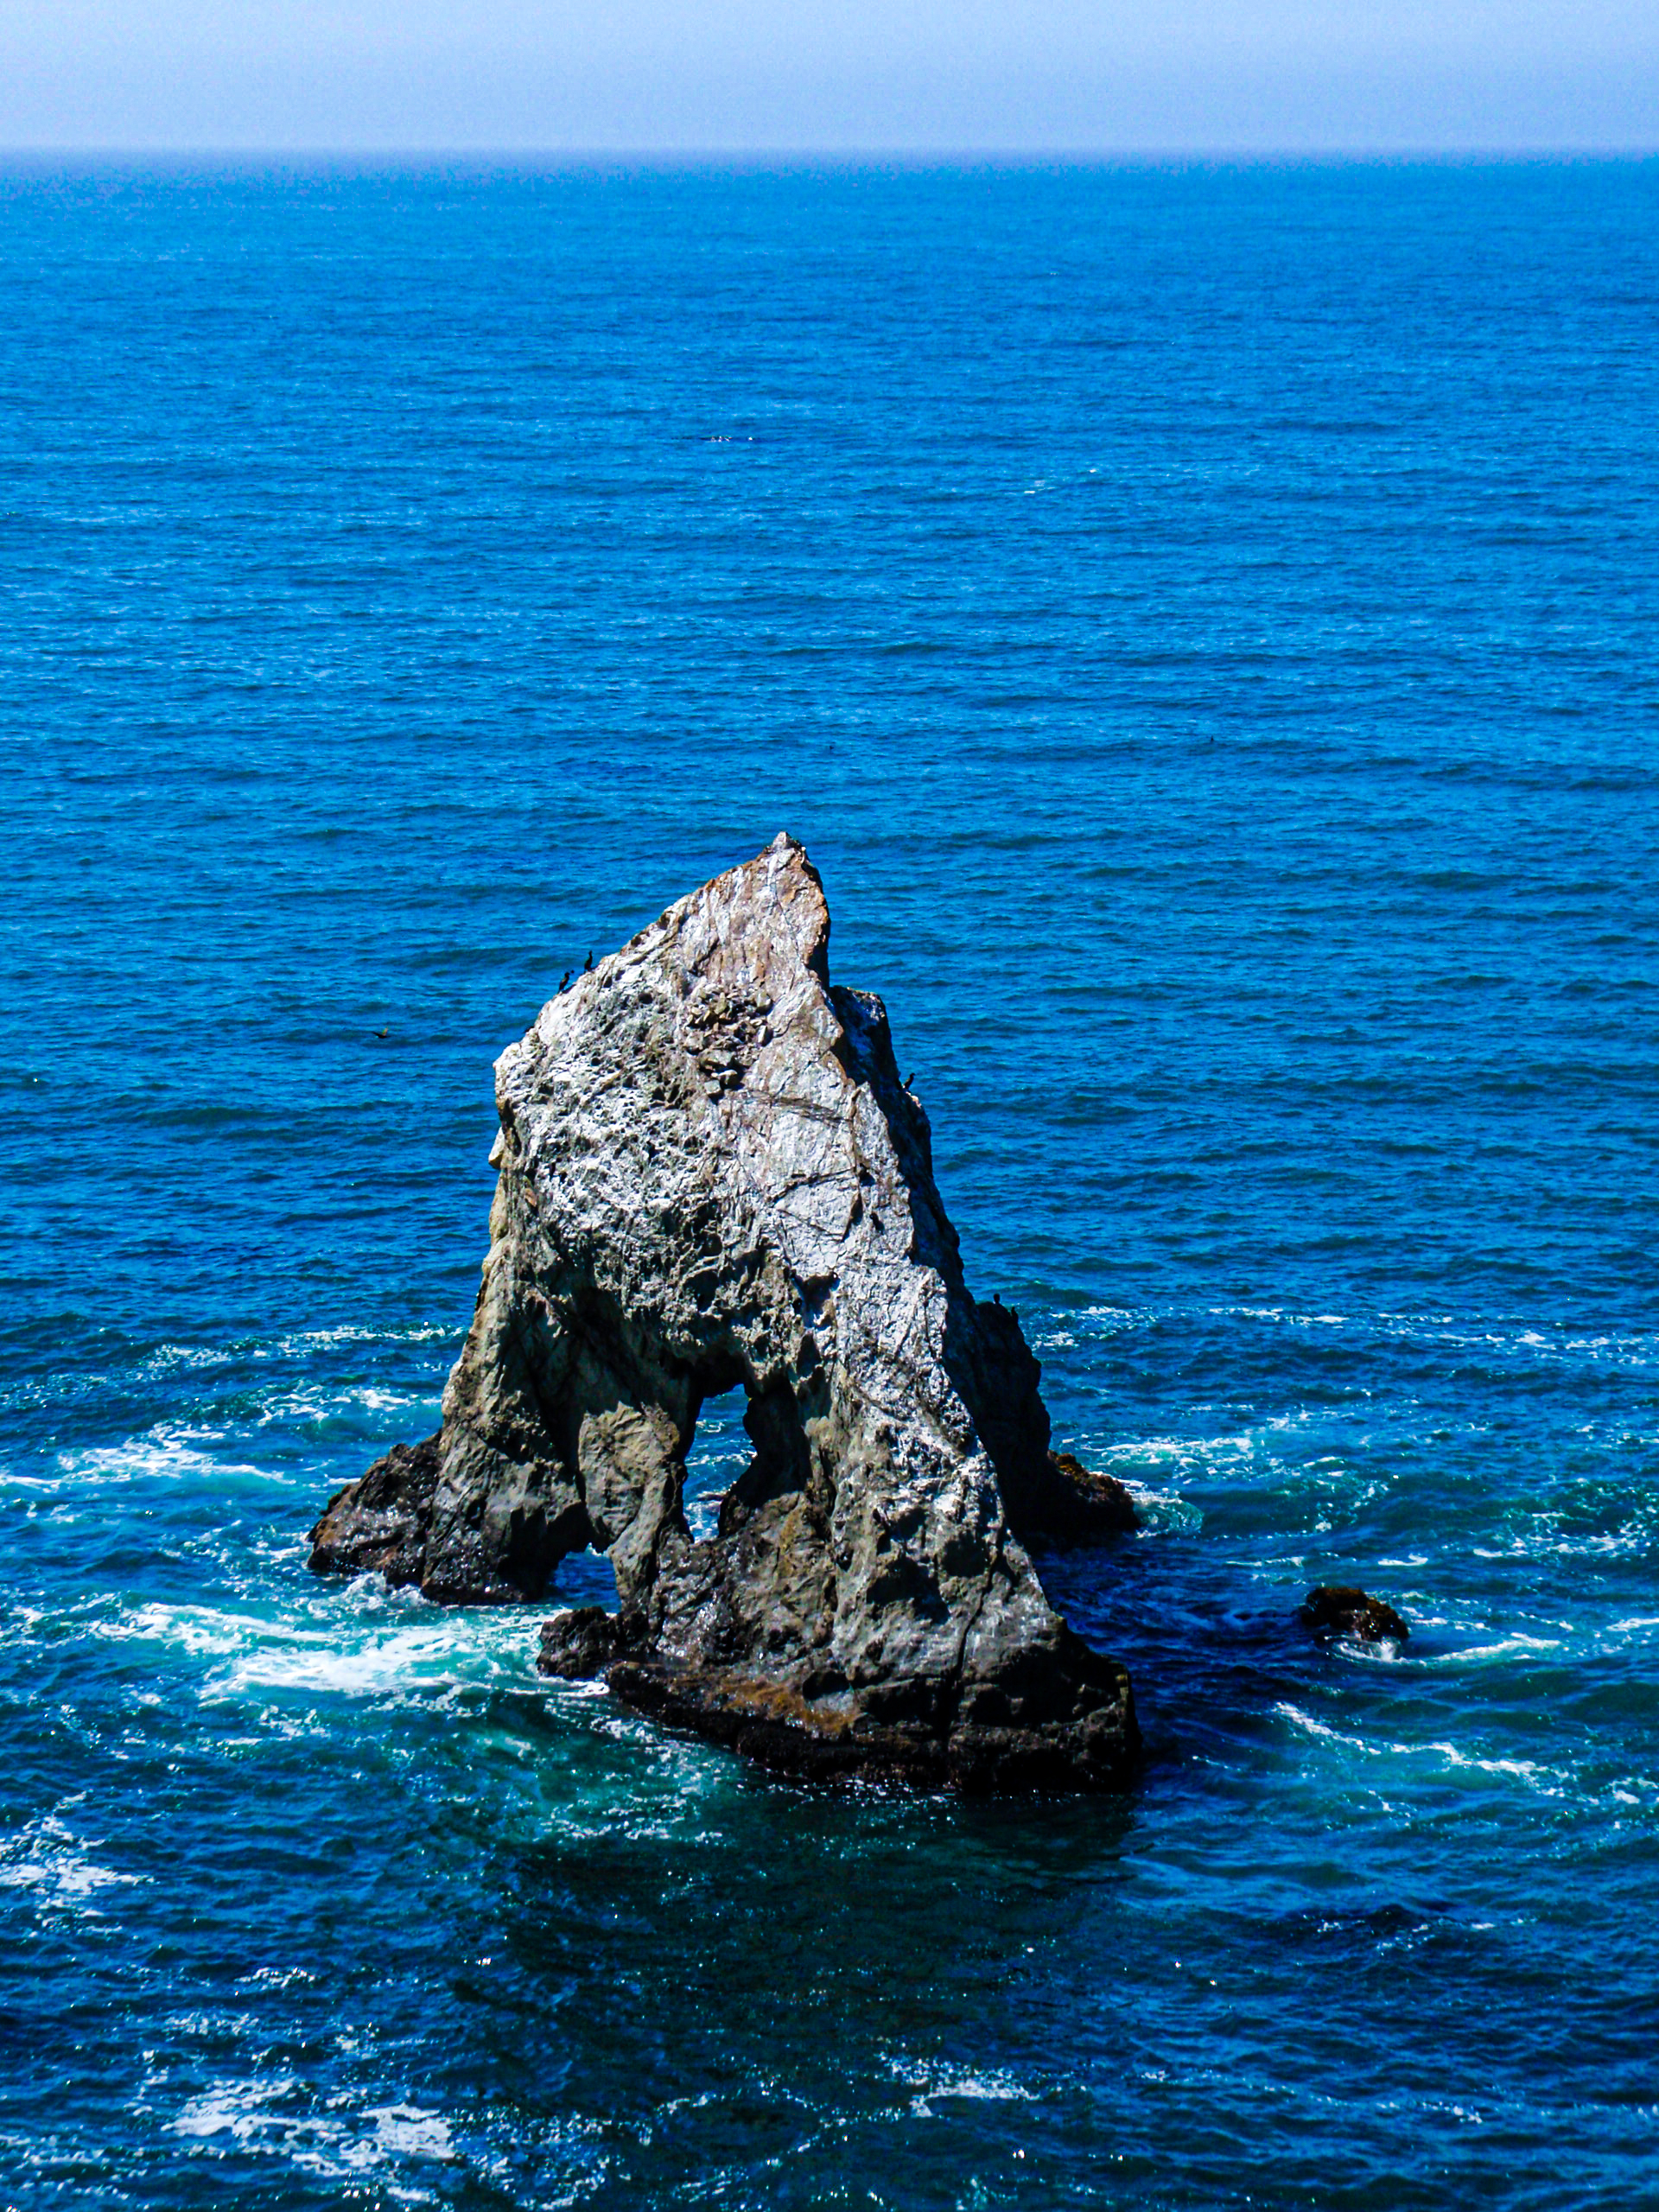 A arched rock protruding from the ocean with deep blue water and grey, intricate stone.